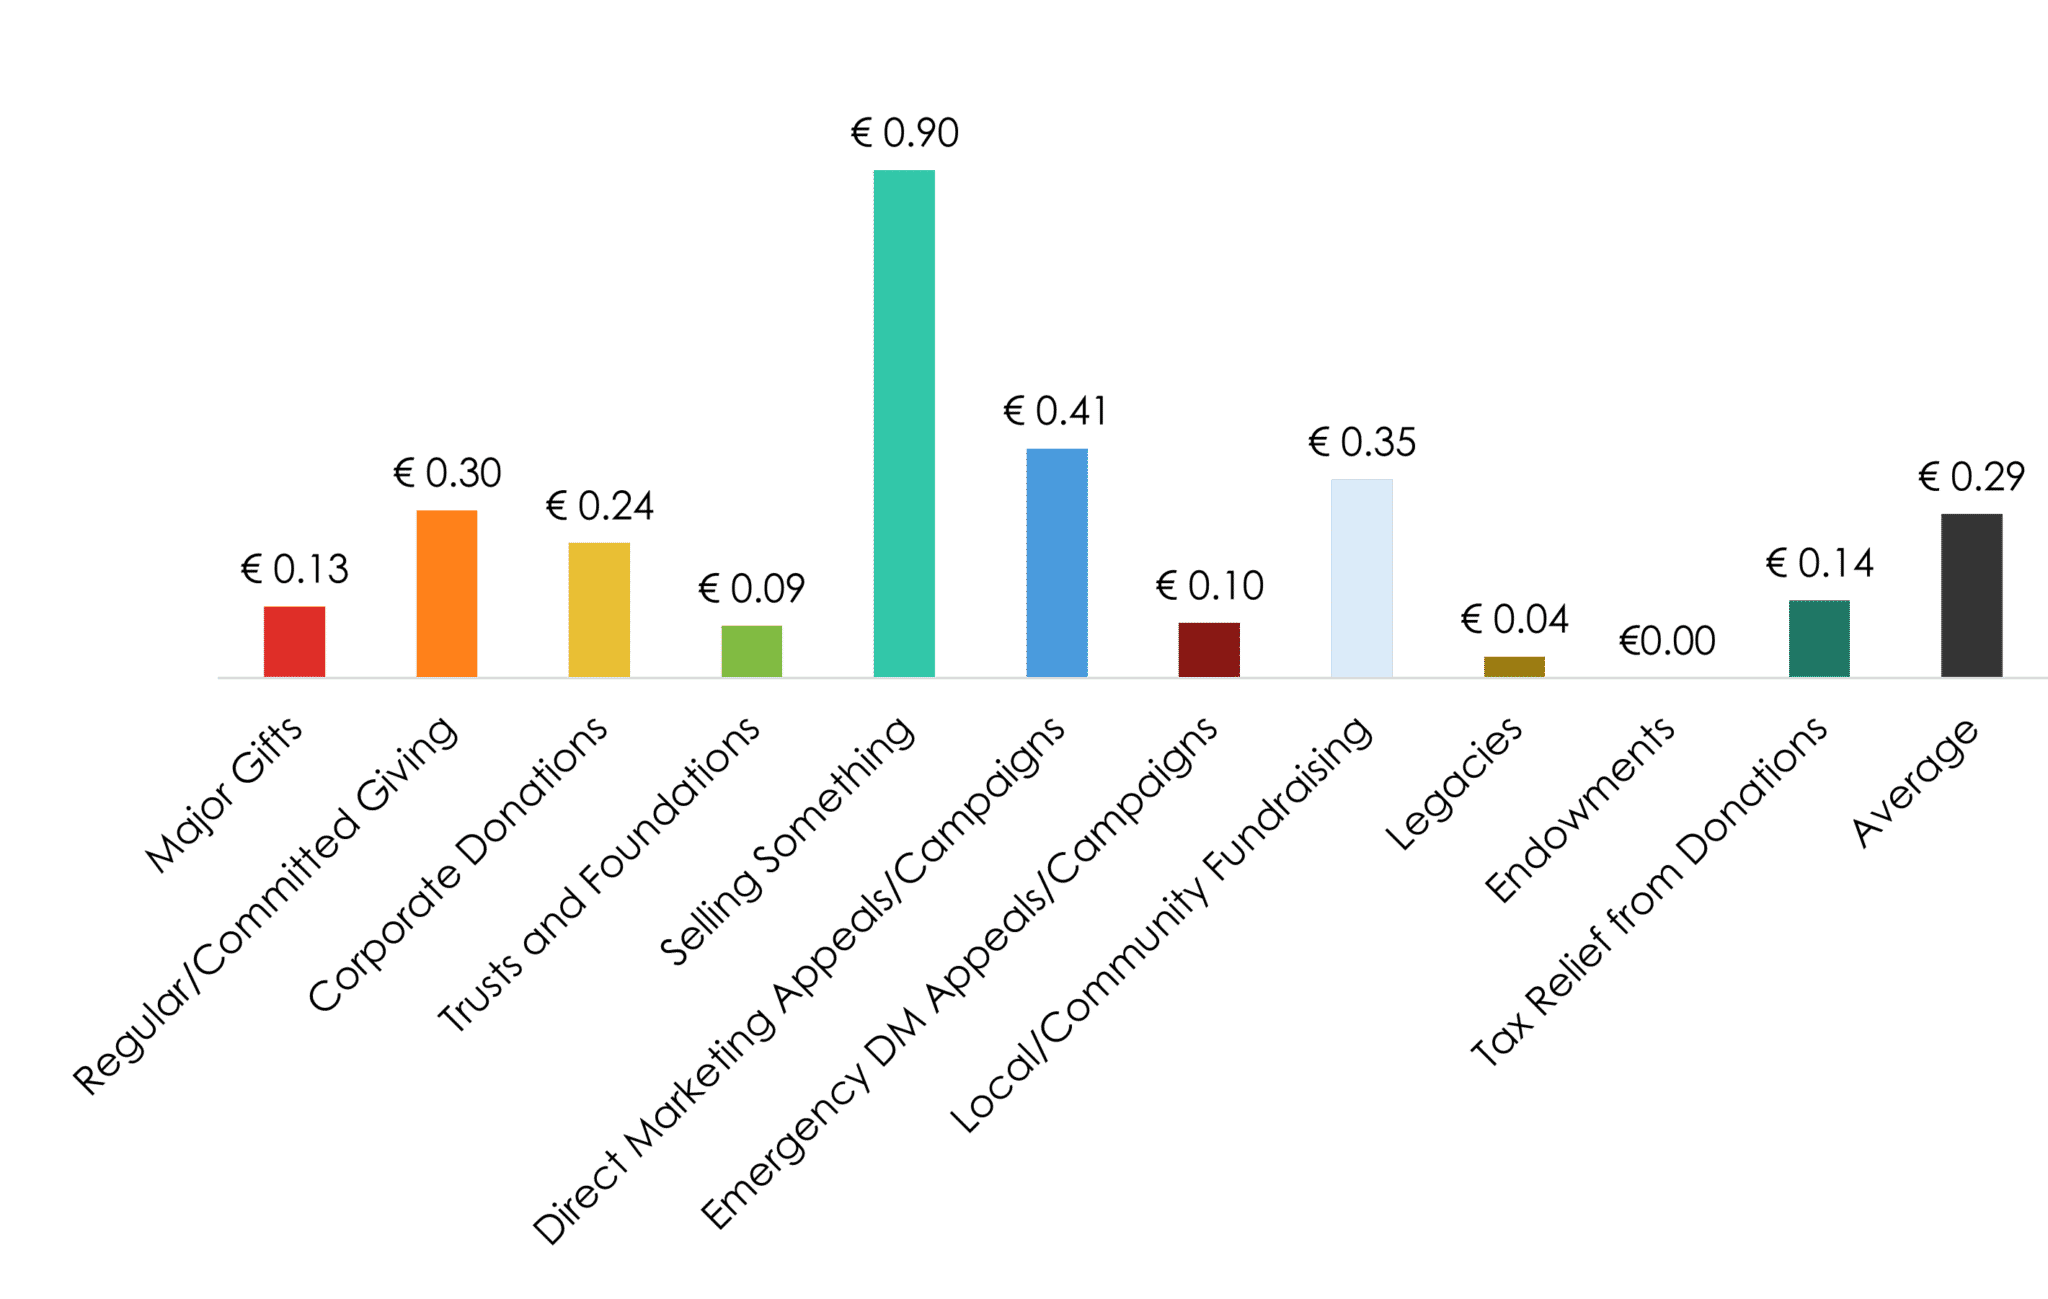 Cost to raise €1 in 2018 Irish Giving Index 2018